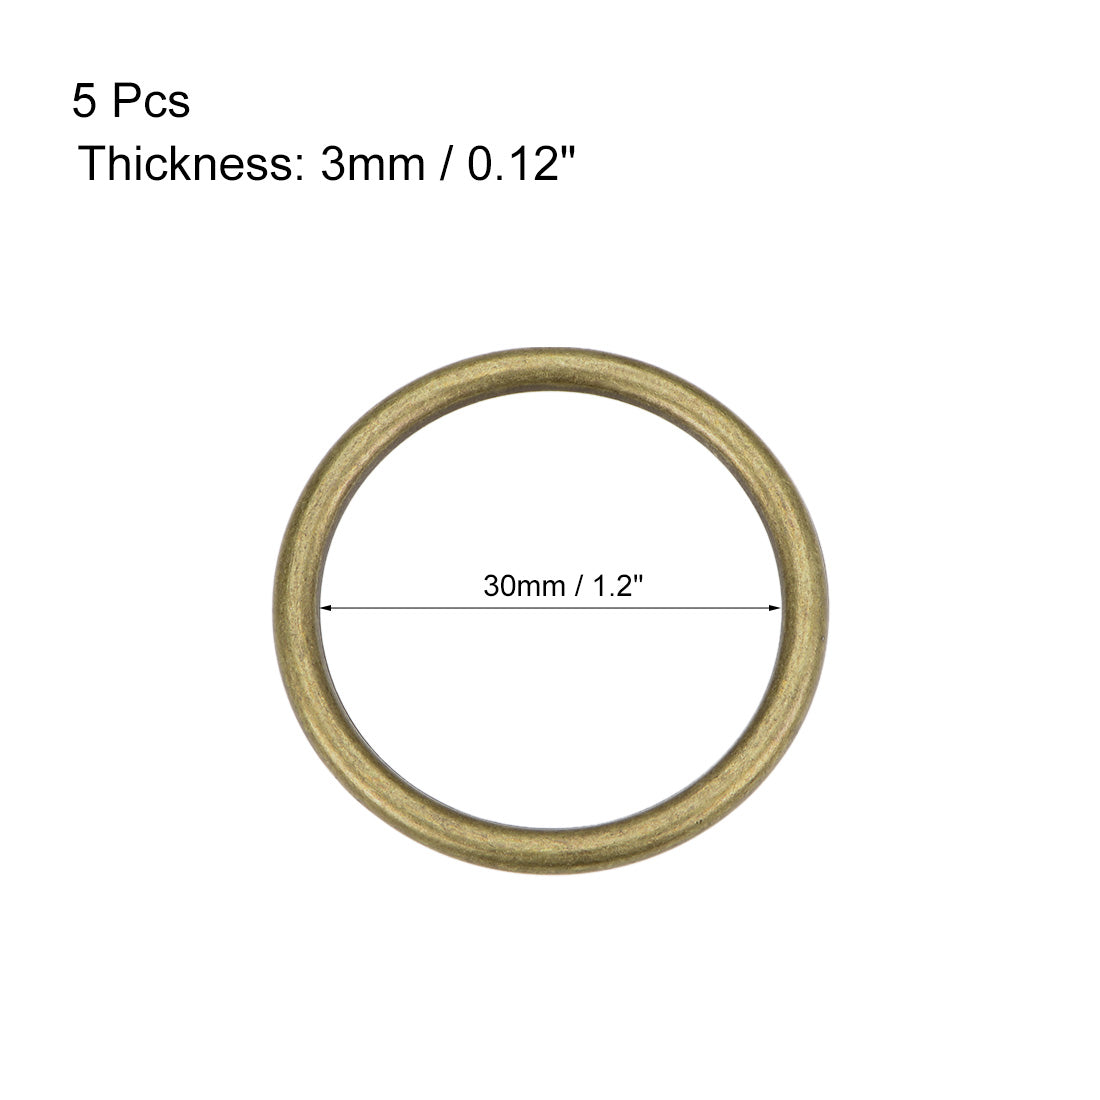 uxcell Uxcell O Ring Buckle 30mm(1.2") ID 3mm Thickness Zinc Alloy O-Rings for Hardware Bags Belts Craft DIY Accessories, Bronze Tone 5pcs